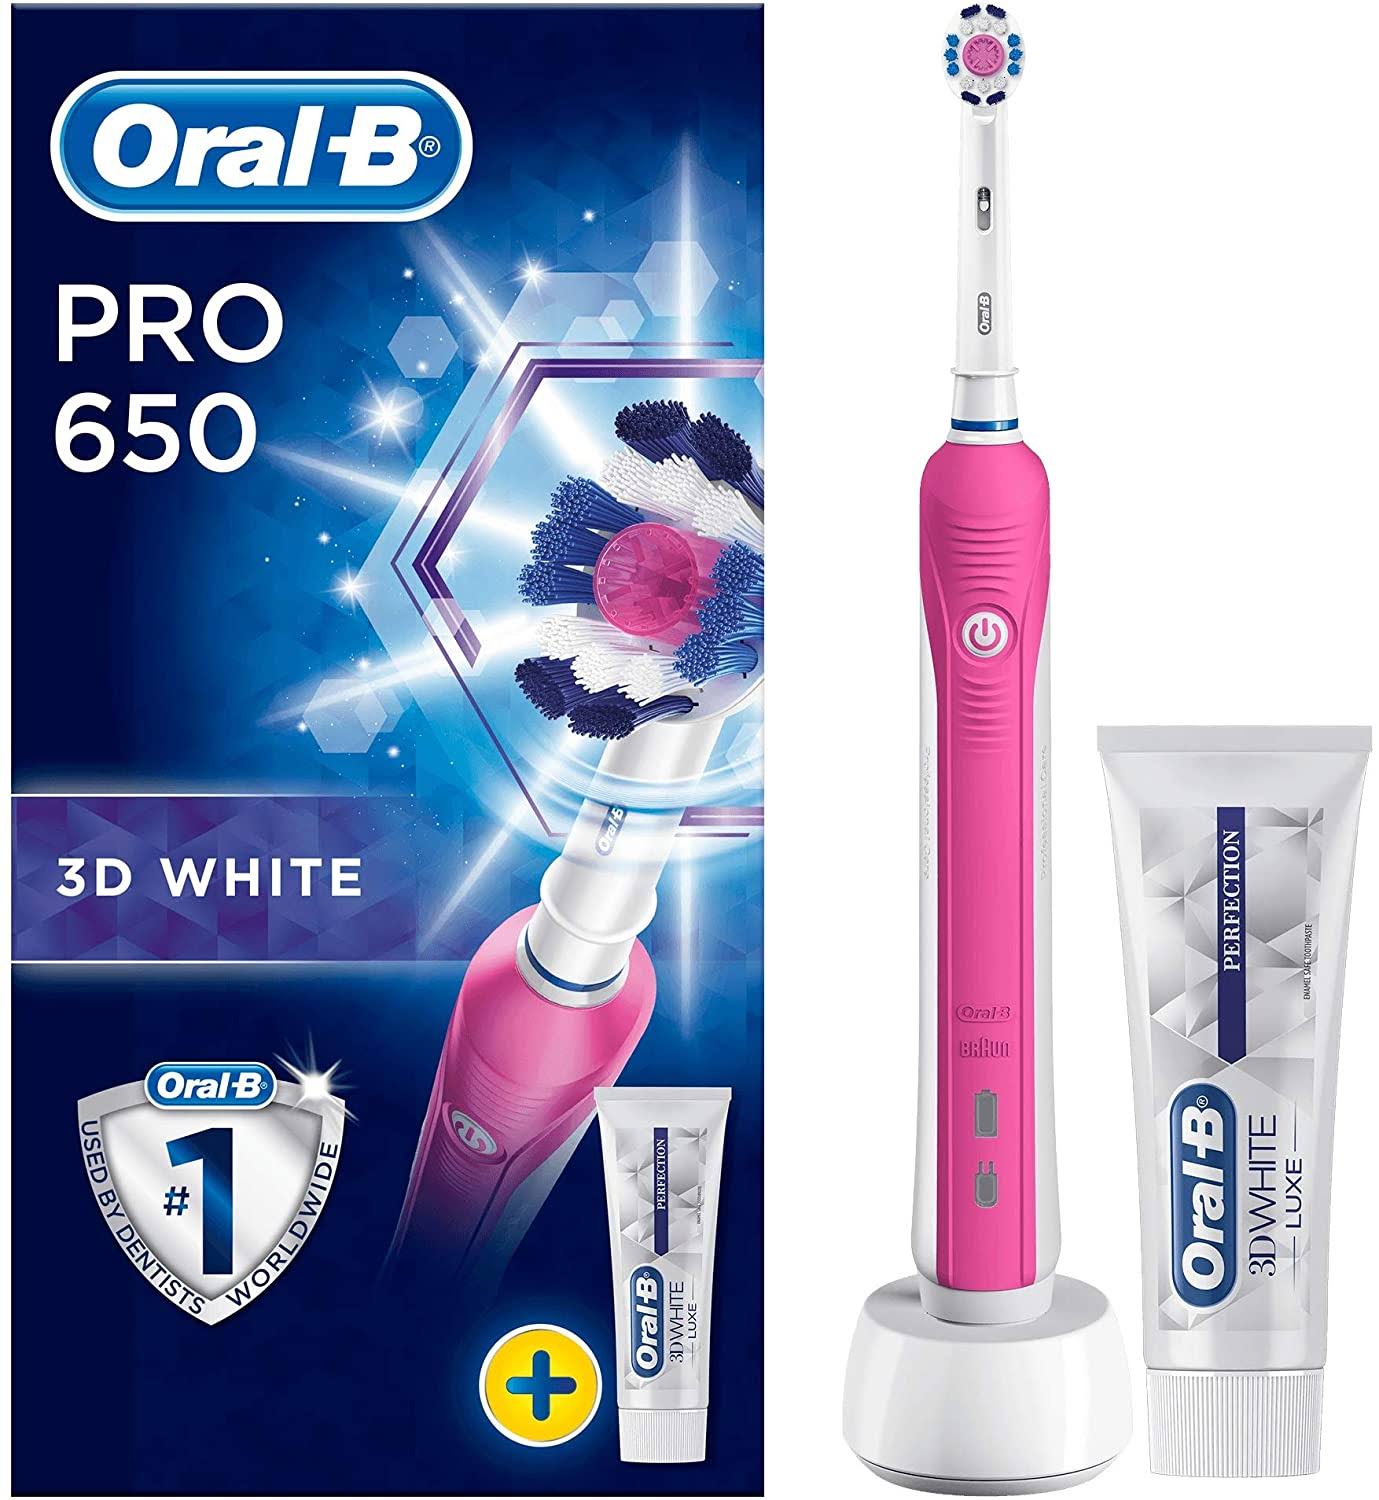 Oral-B Pro 650 Pink Electric Toothbrush with Bonus Toothpaste